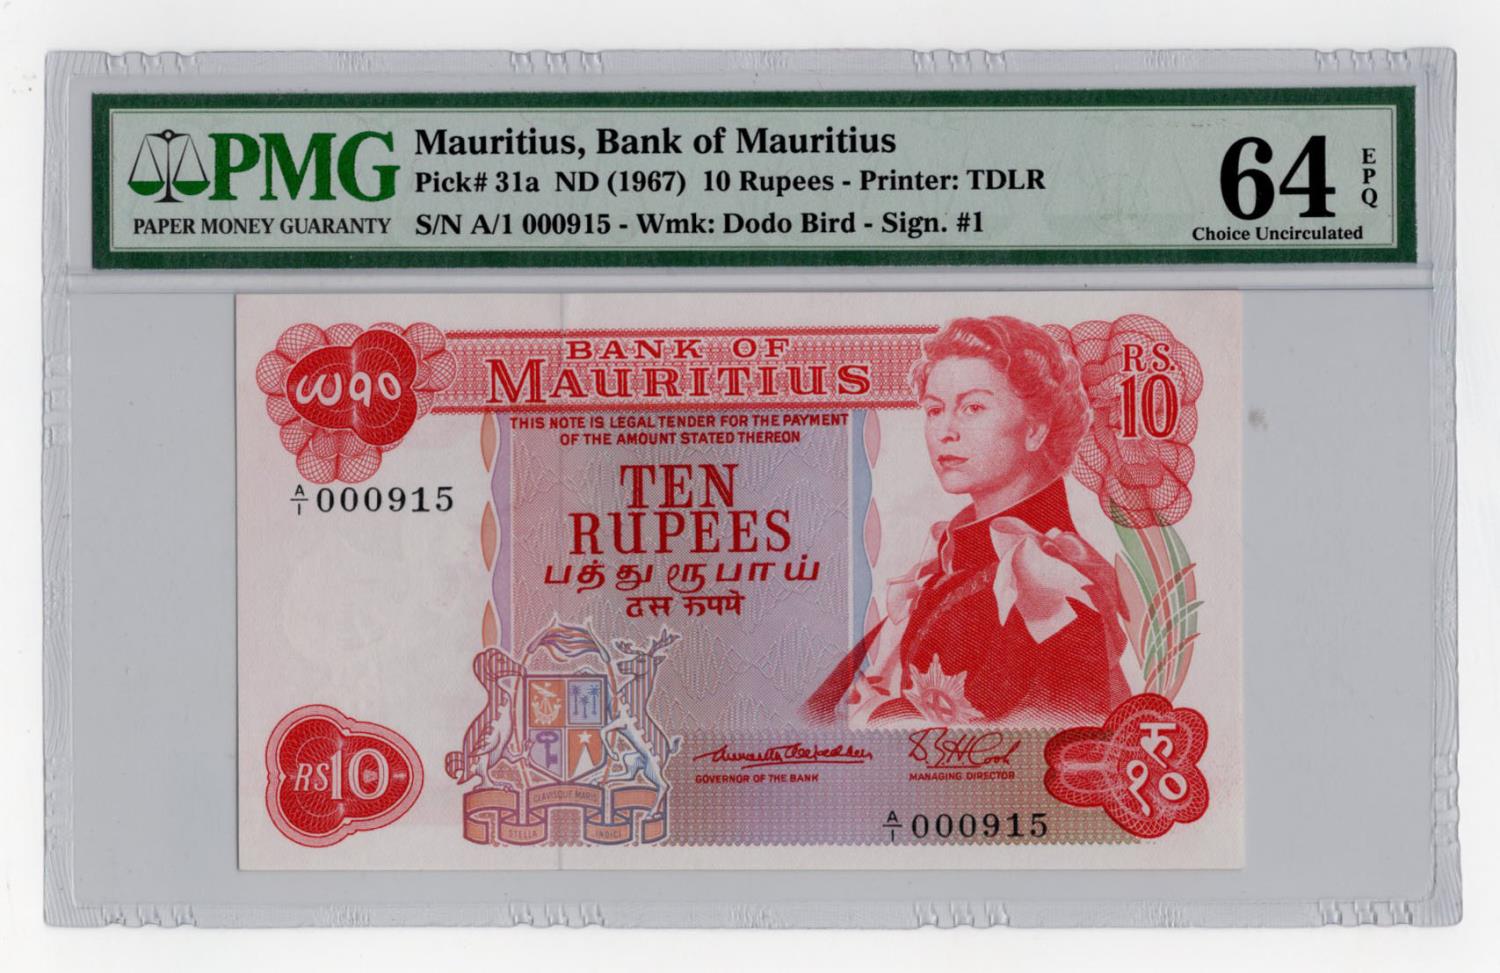 Mauritius 10 Rupees issued 1967, portrait Queen Elizabeth II at right, FIRST RUN 'A/1' prefix with